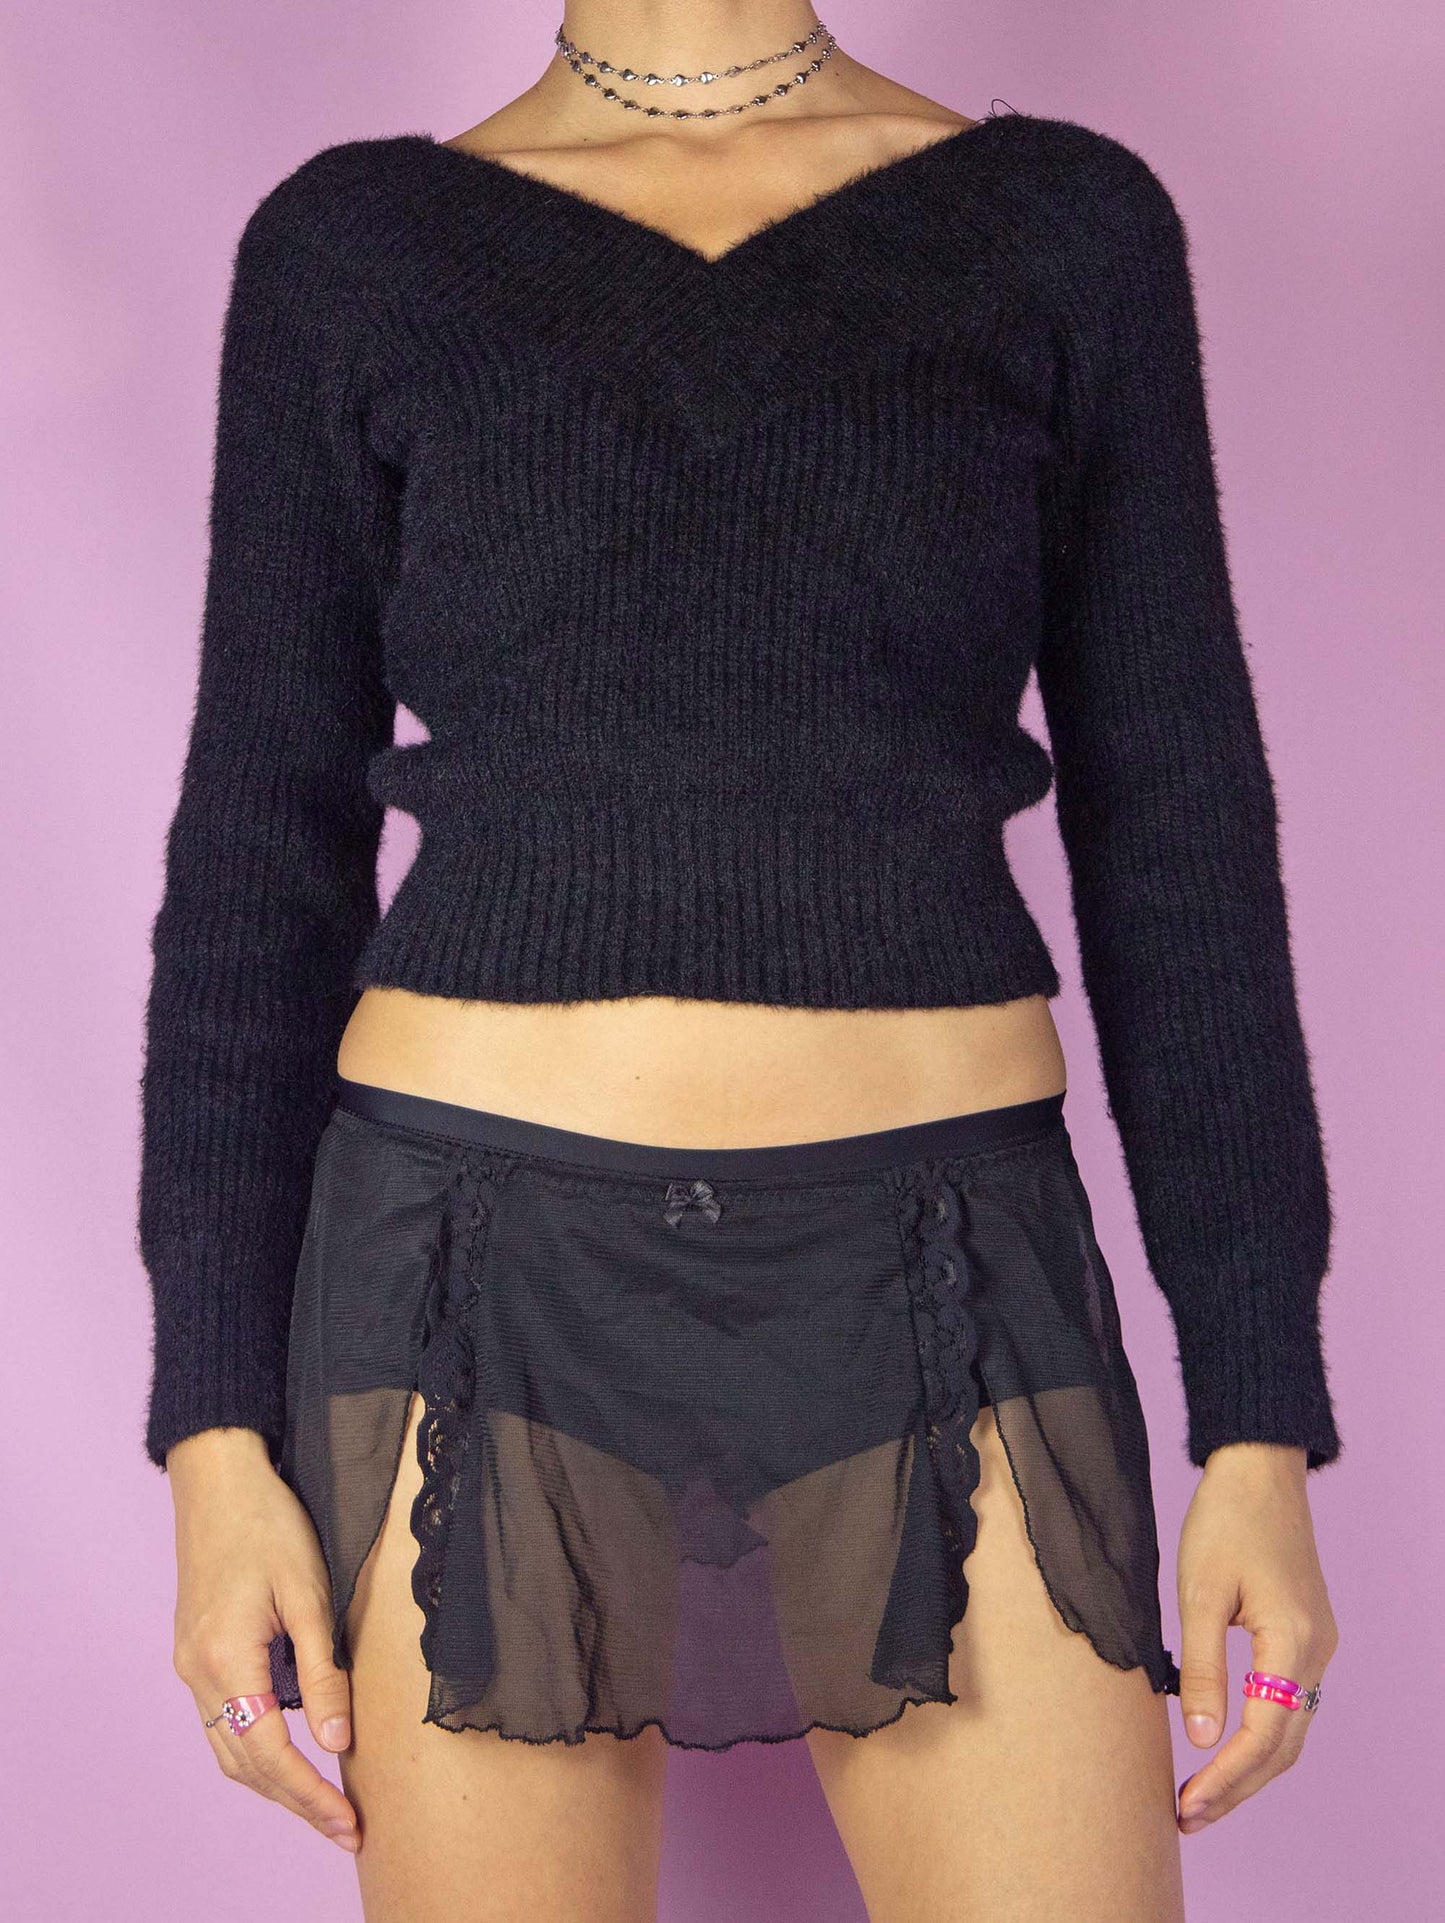 The Vintage 90s Black Mesh Slip Skirt is a semi-sheer mini skirt with side slits adorned with lace details, and an elastic waistband. Romantic 1990s lingerie micro skirt.